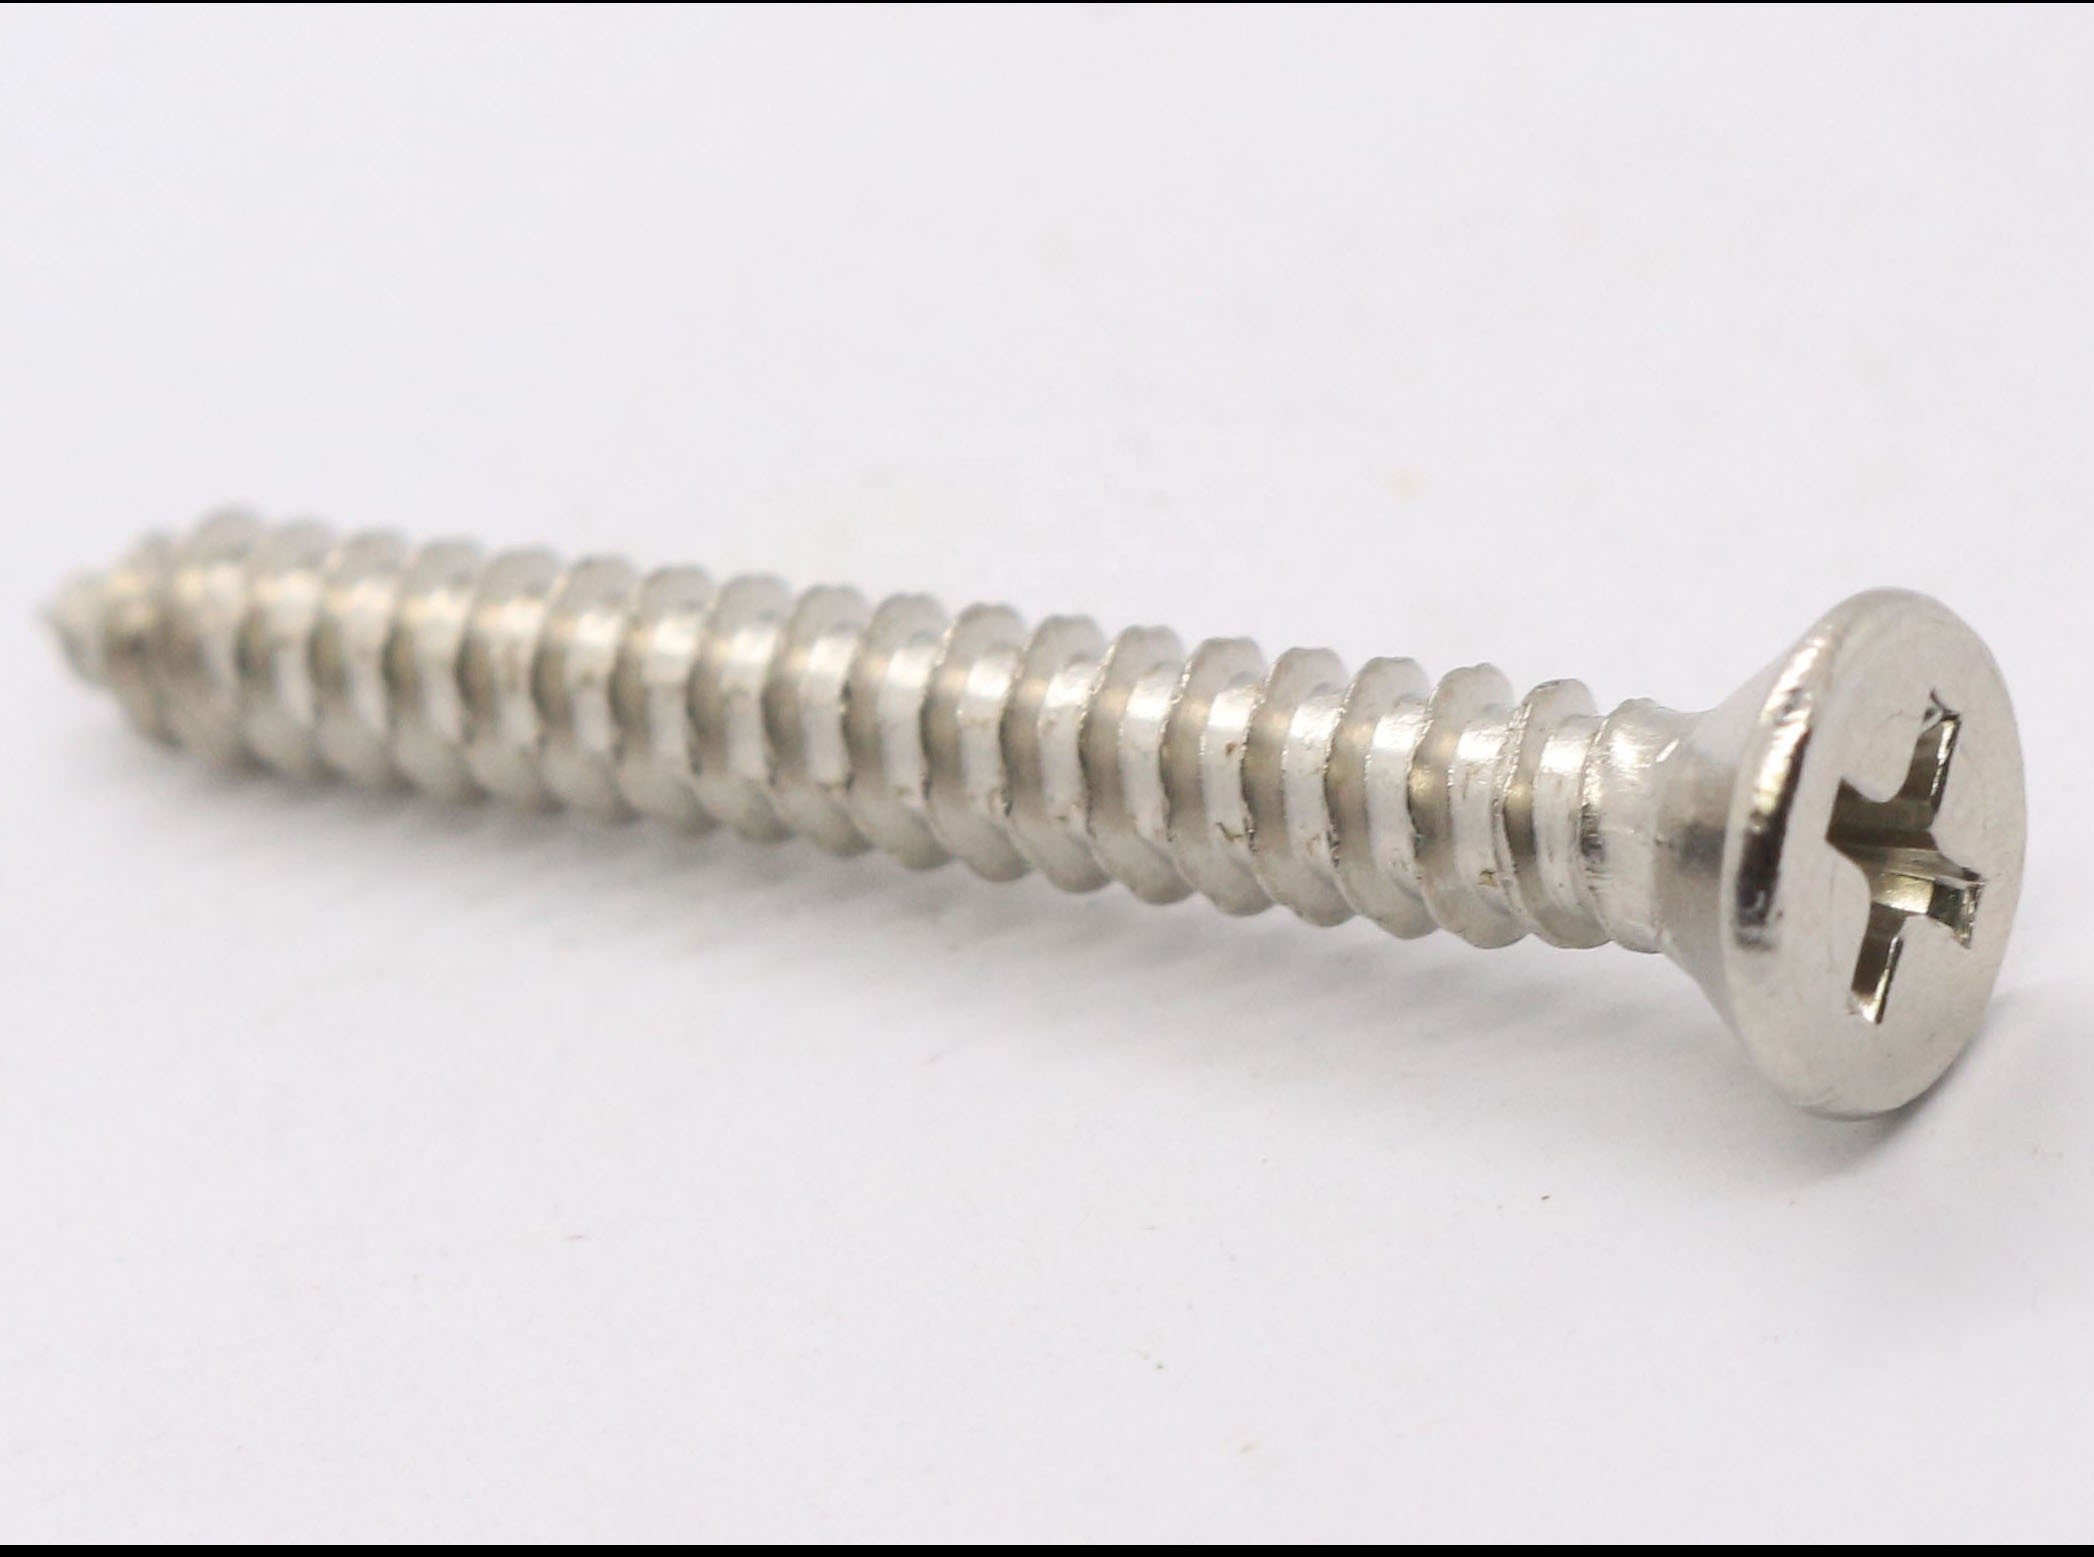 18-8 Stainless Steel Phillips countersunk Head Screws for Sheet Metal